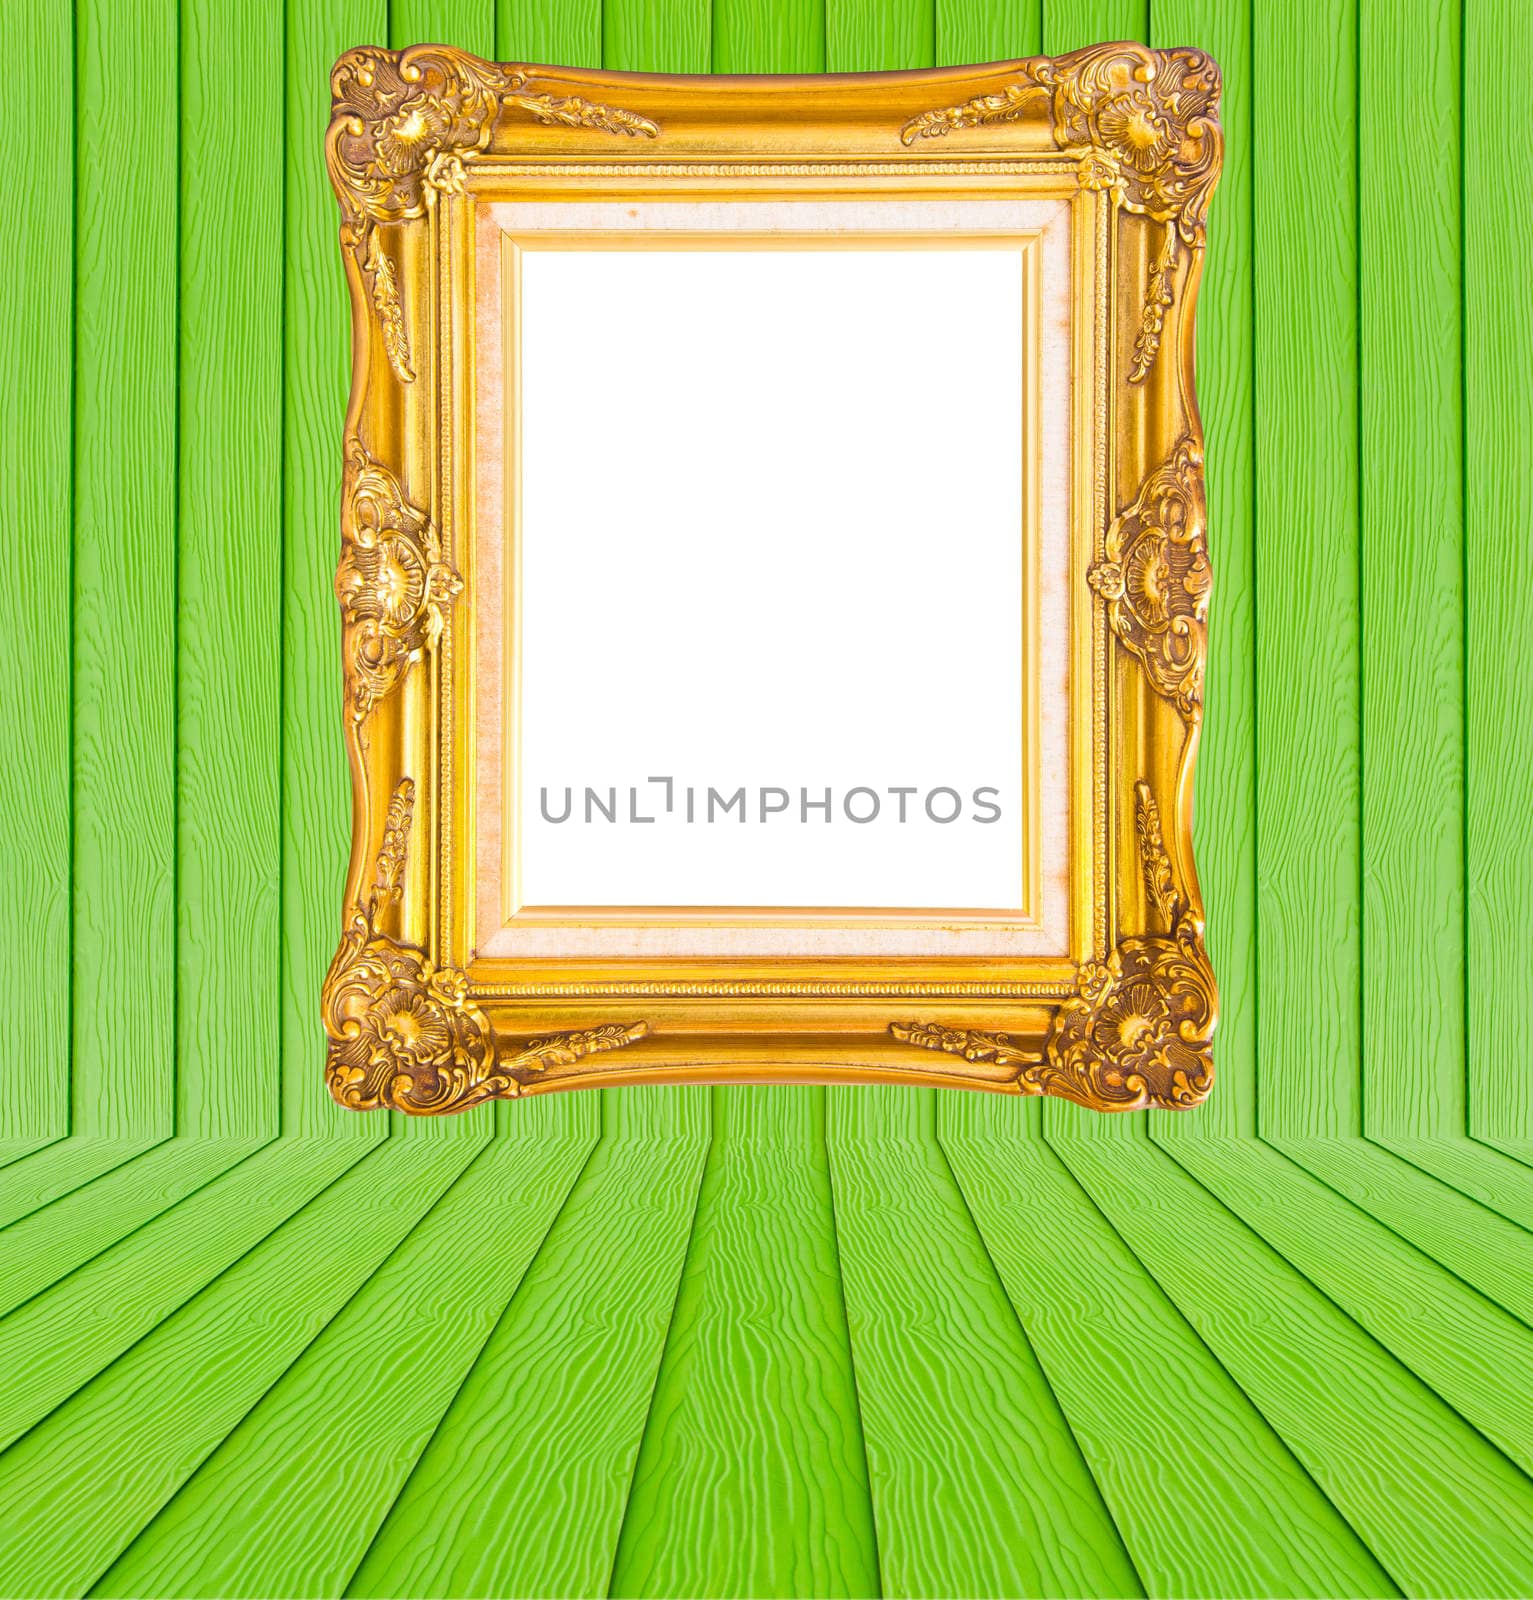 Green Wood texture background by Gamjai